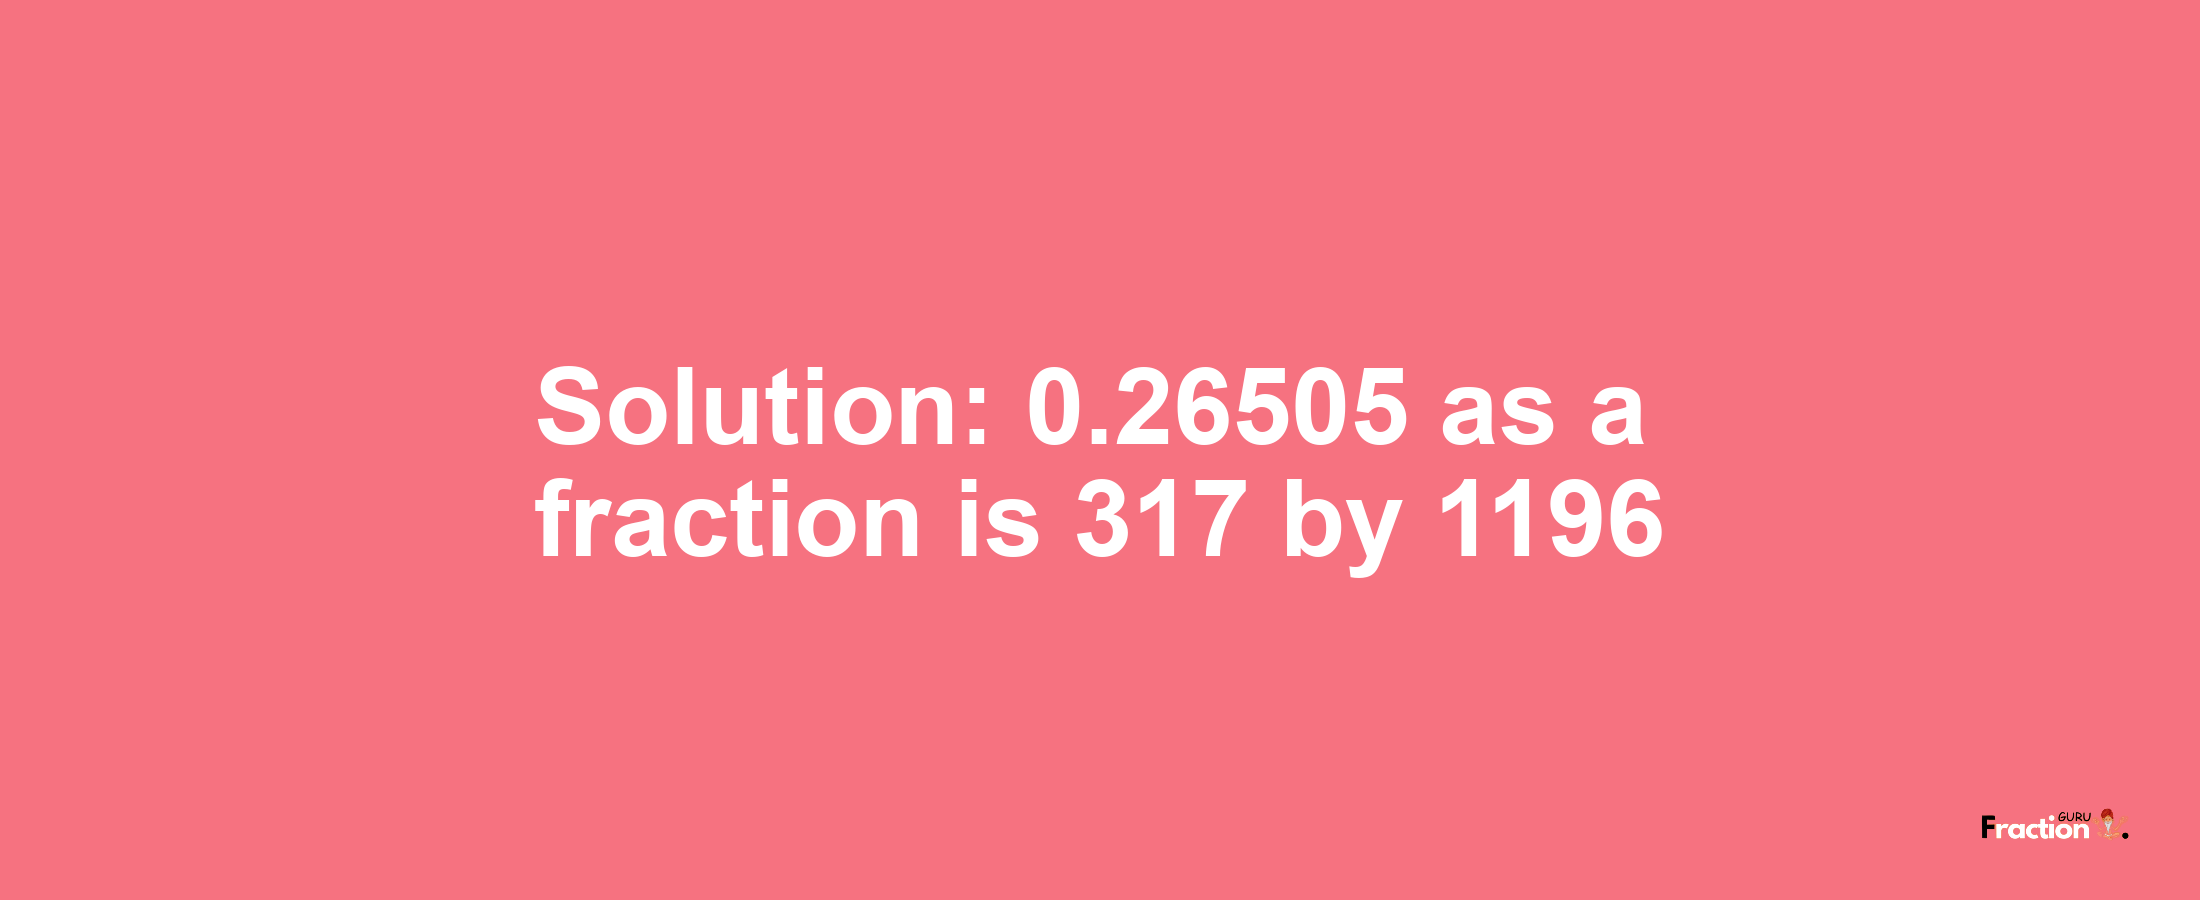 Solution:0.26505 as a fraction is 317/1196